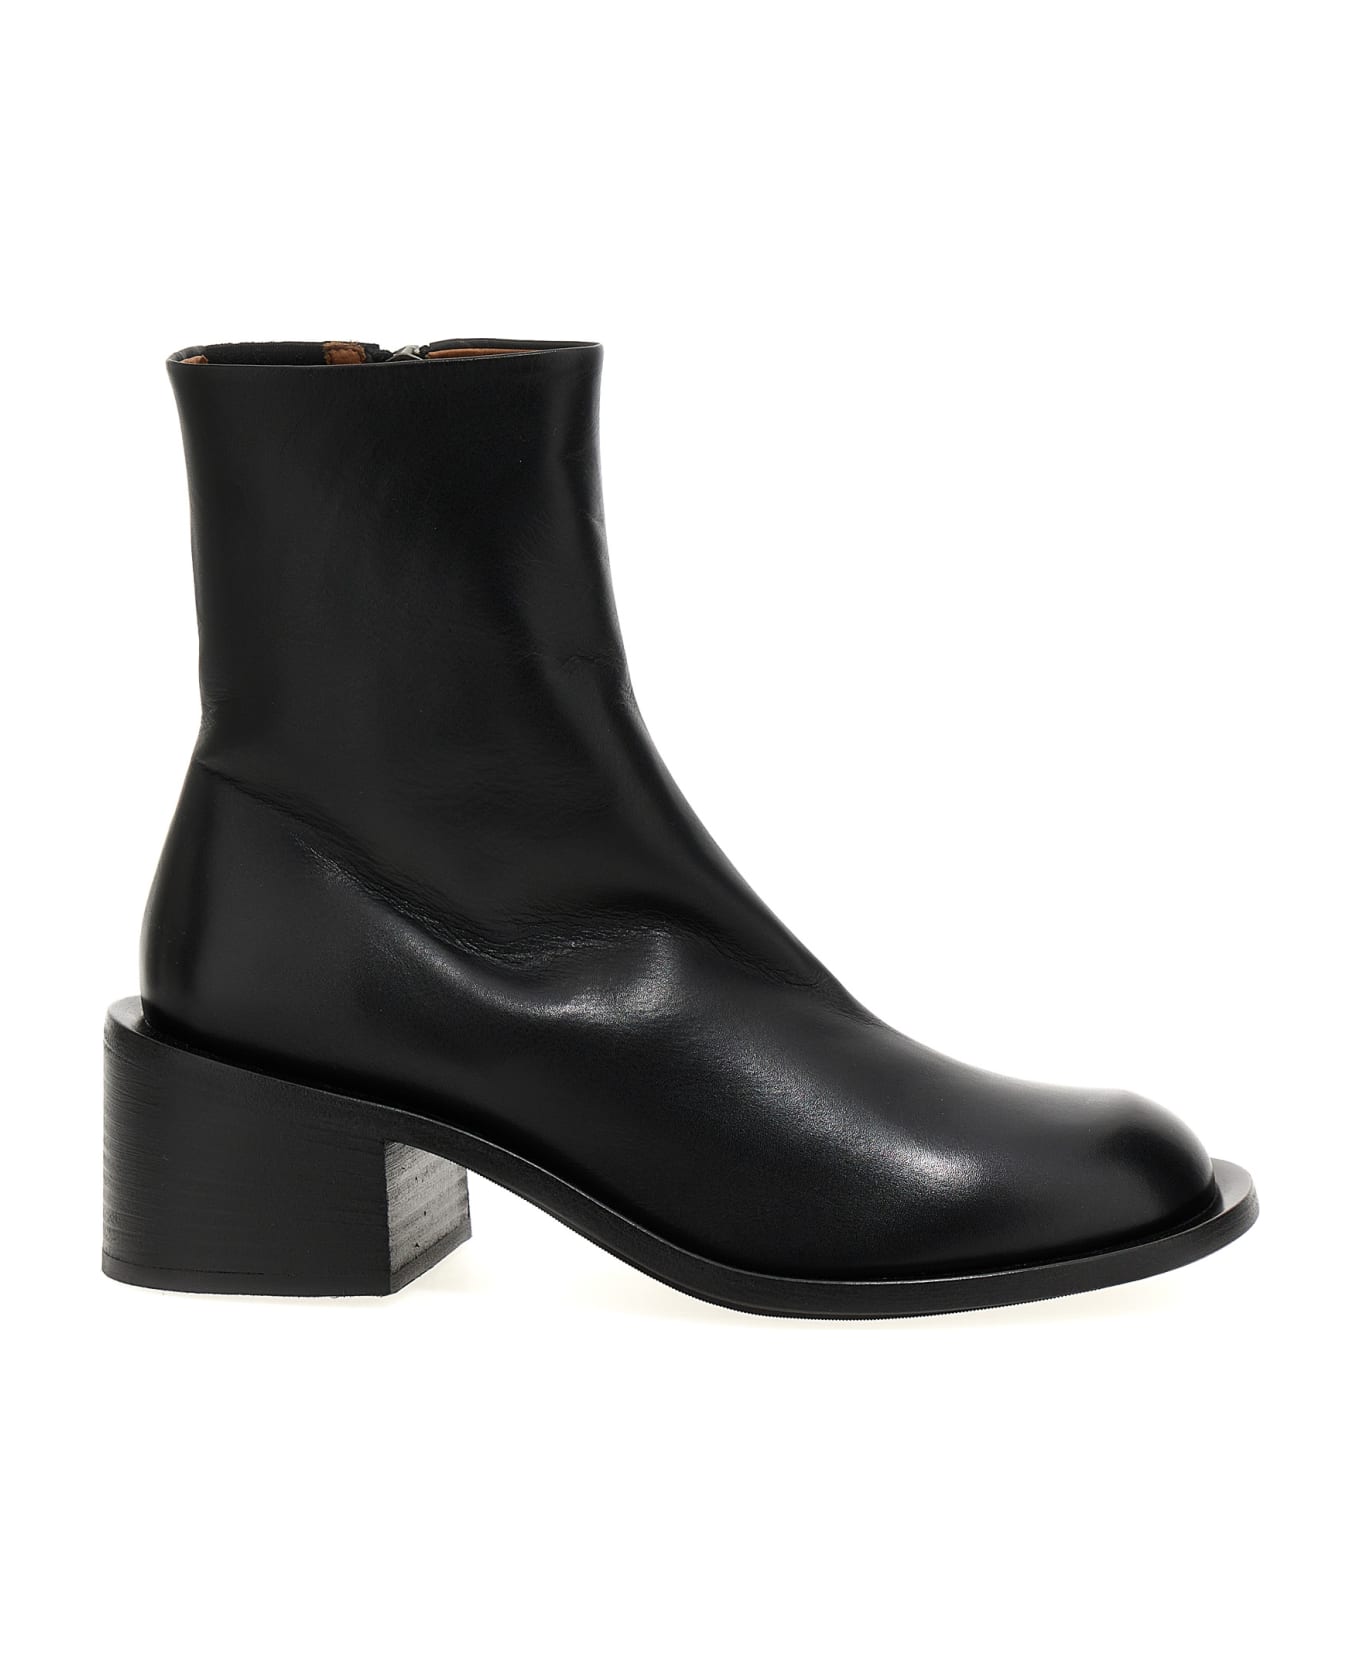 Marsell 'allucino' Ankle Boots - Black   ブーツ